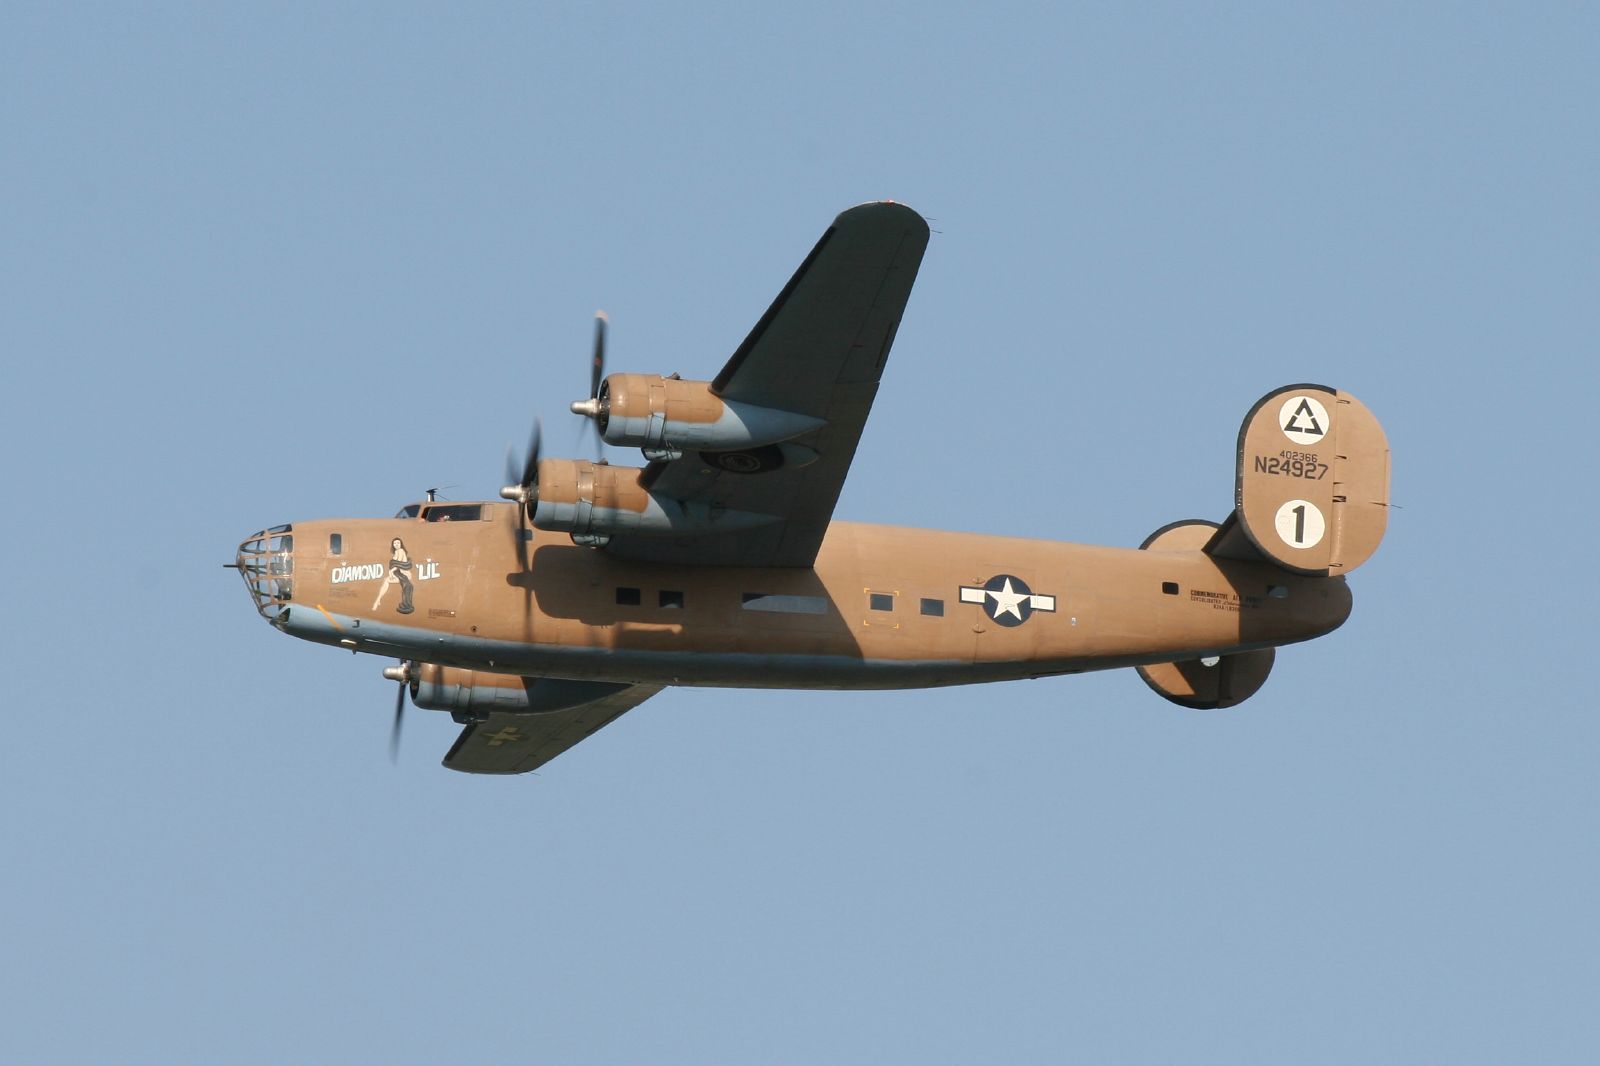 an old war plane is flying in the air